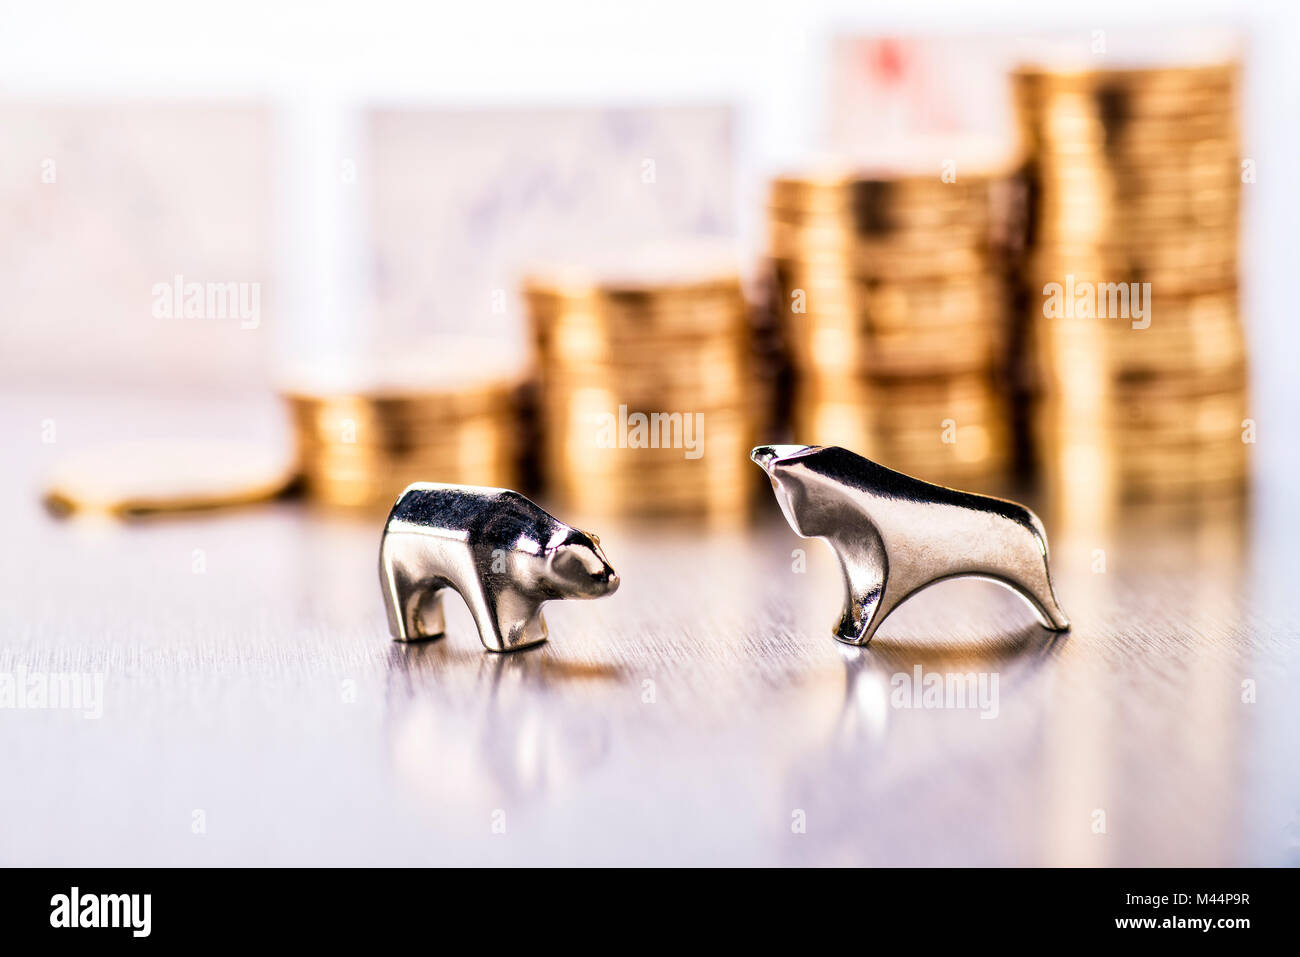 Bull and bear with stacks of coins and stock prices in the background Stock Photo